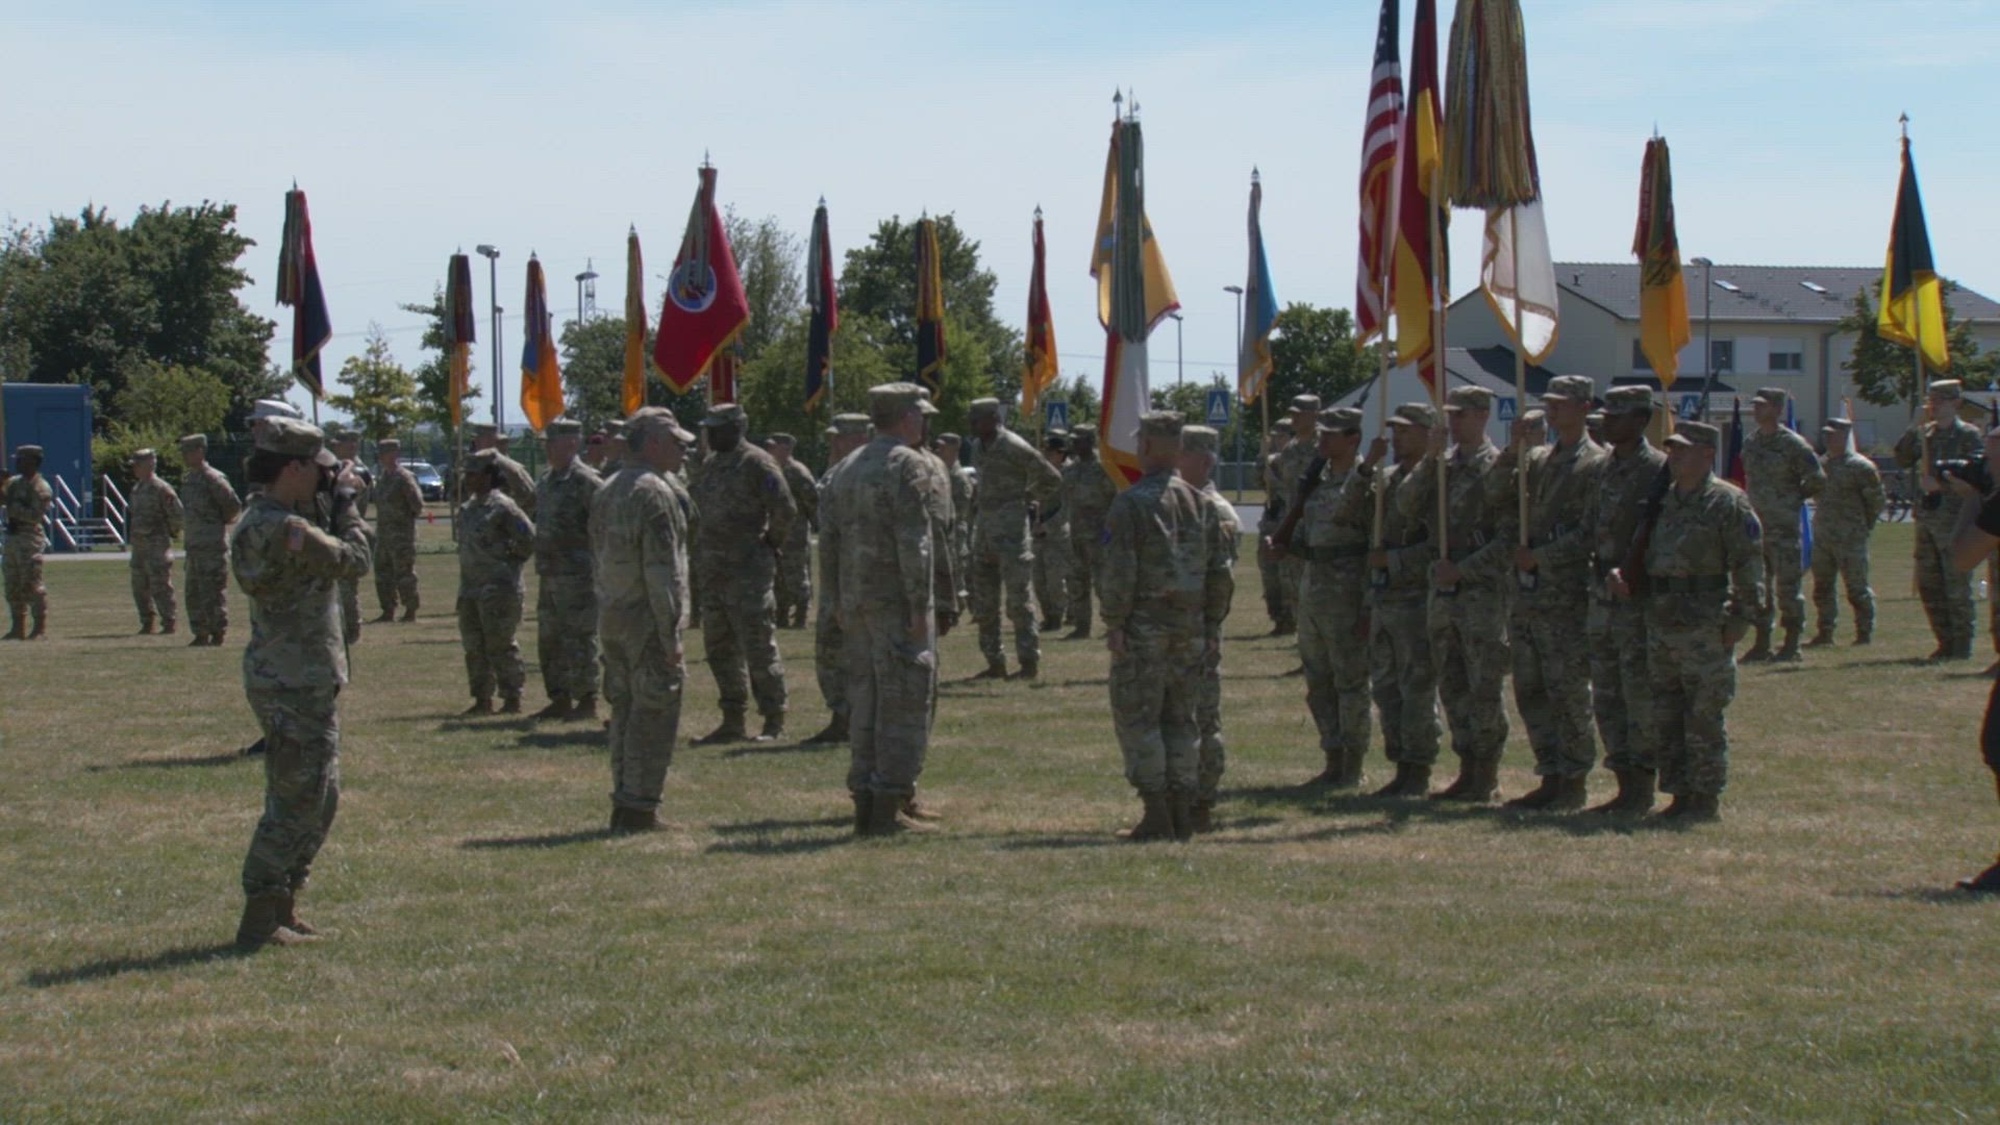 U.S. Army Europe and Africa bids farewell to Gen. Christopher Cavoli and welcomes Gen. Darryl A. Williams as the new commanding general during a change of command ceremony on Clay Kaserne June 28, 2022.